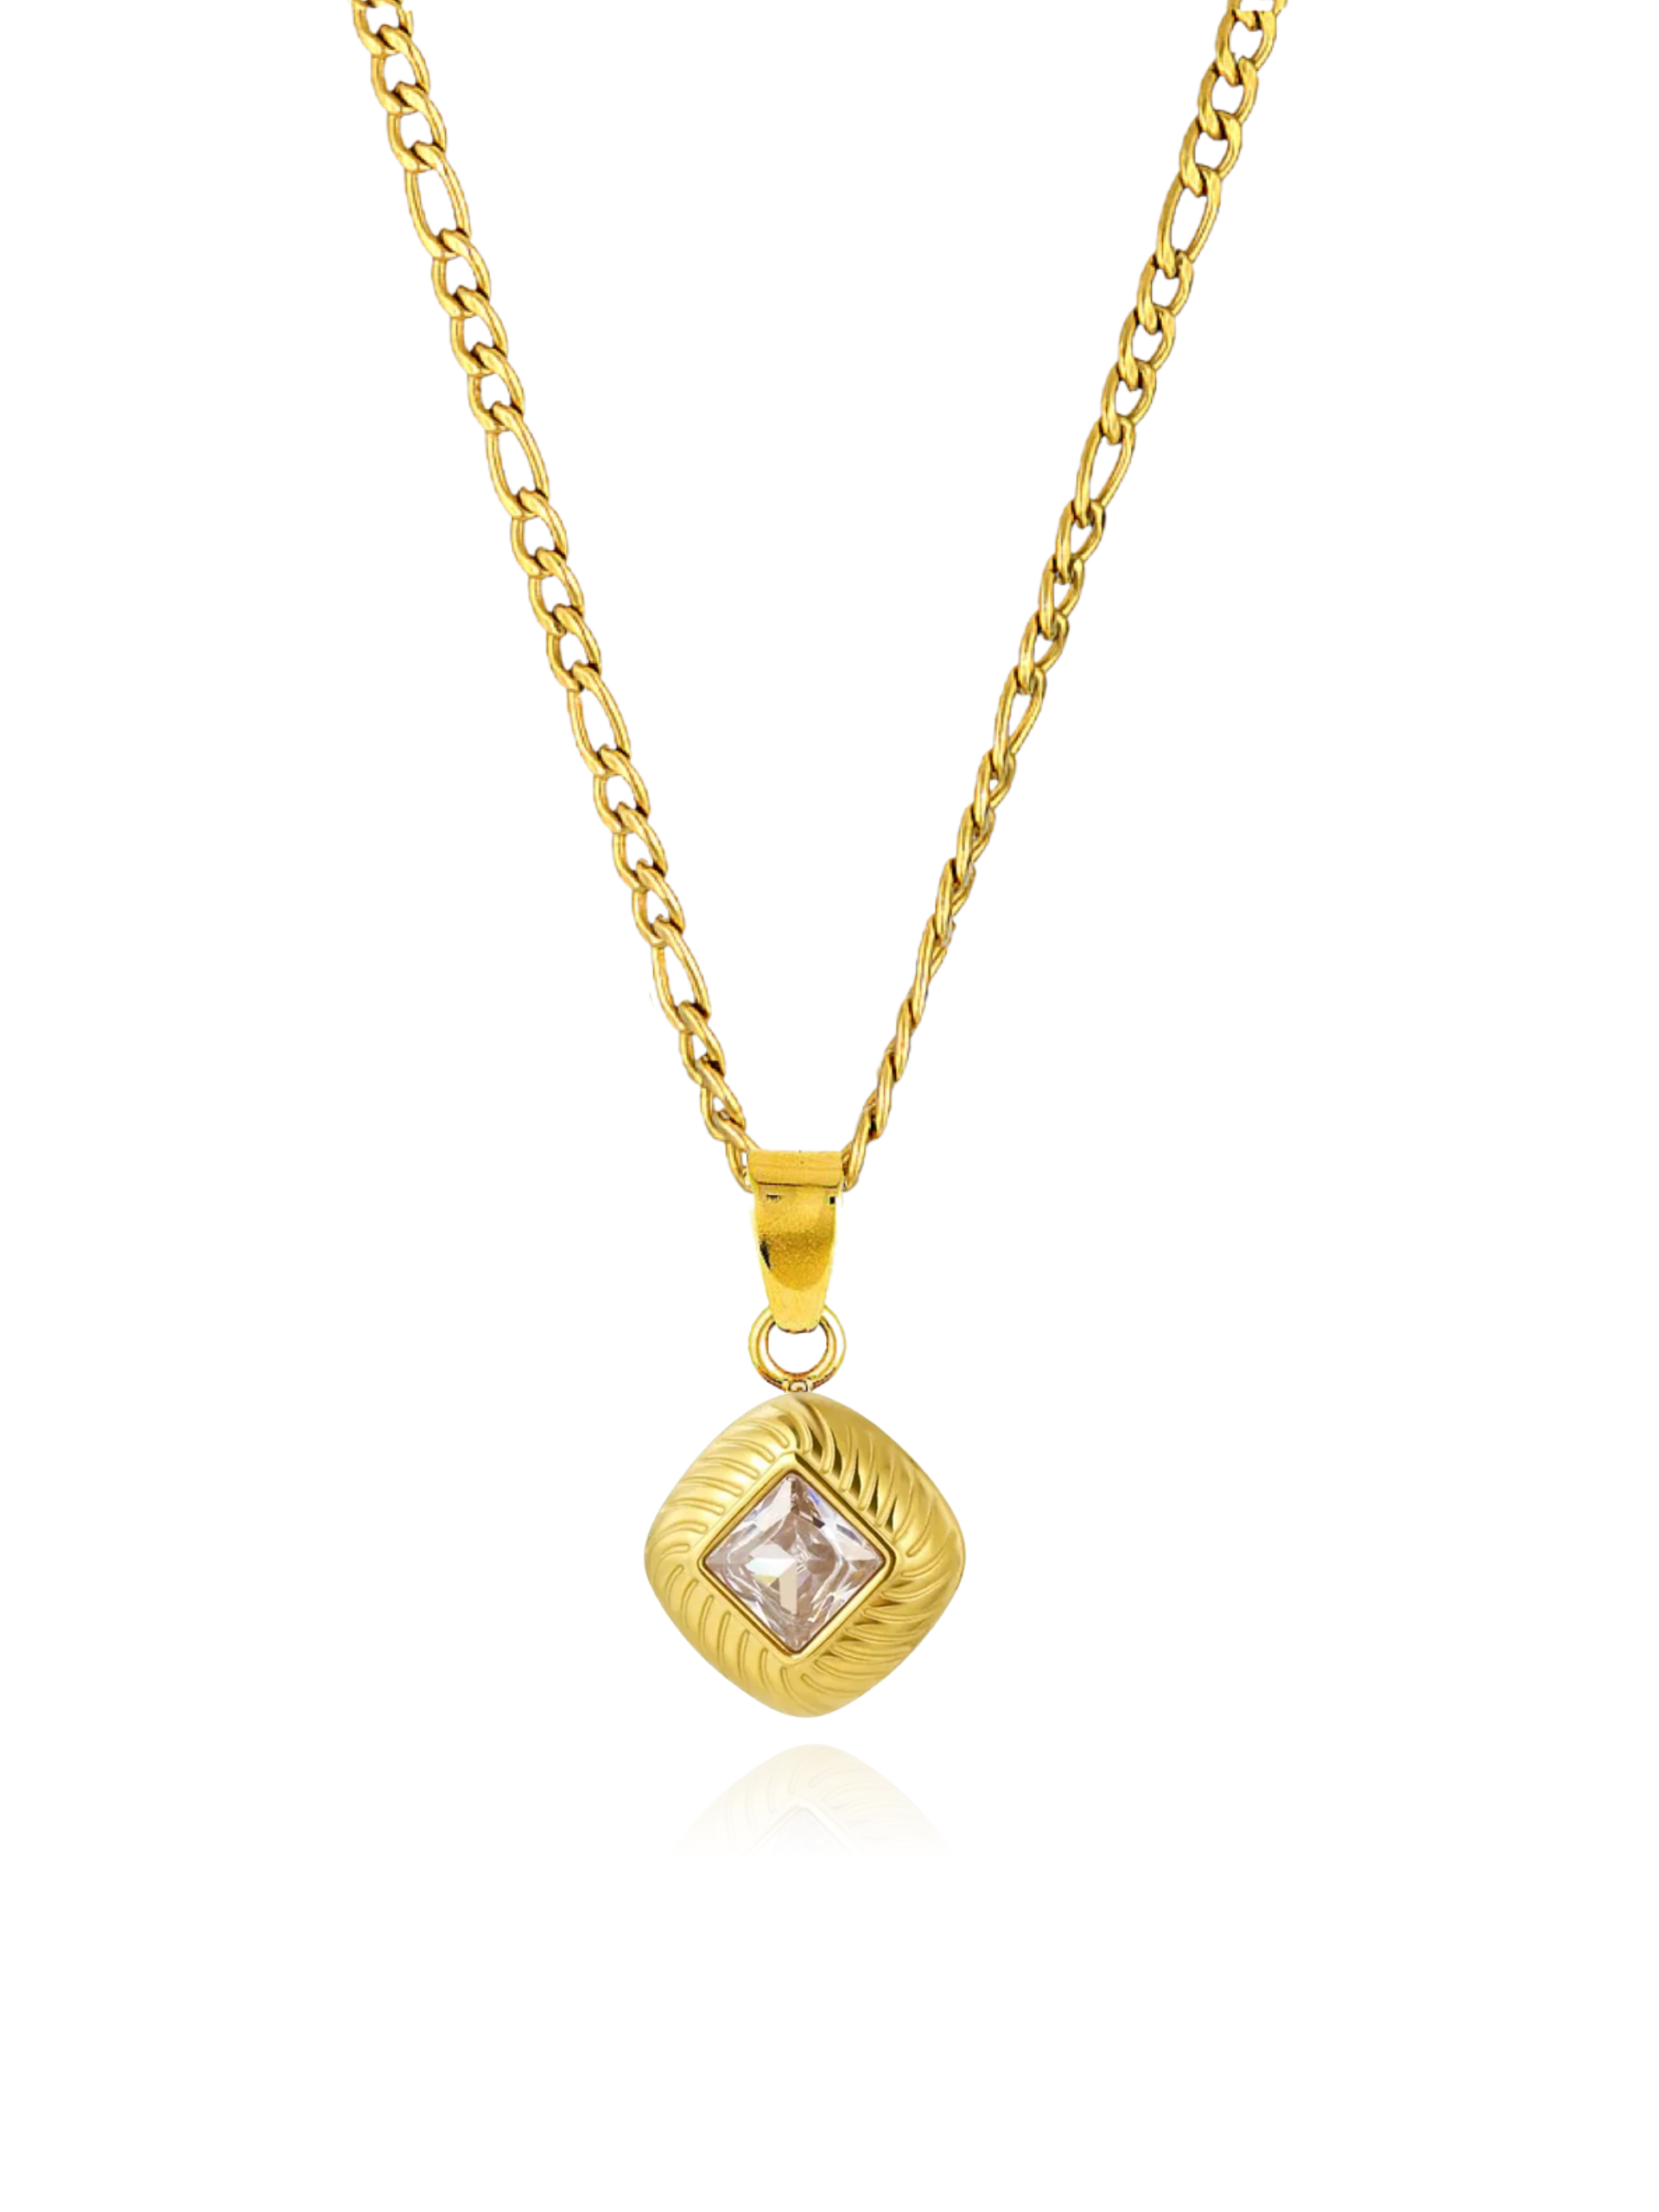 otto necklace - gold